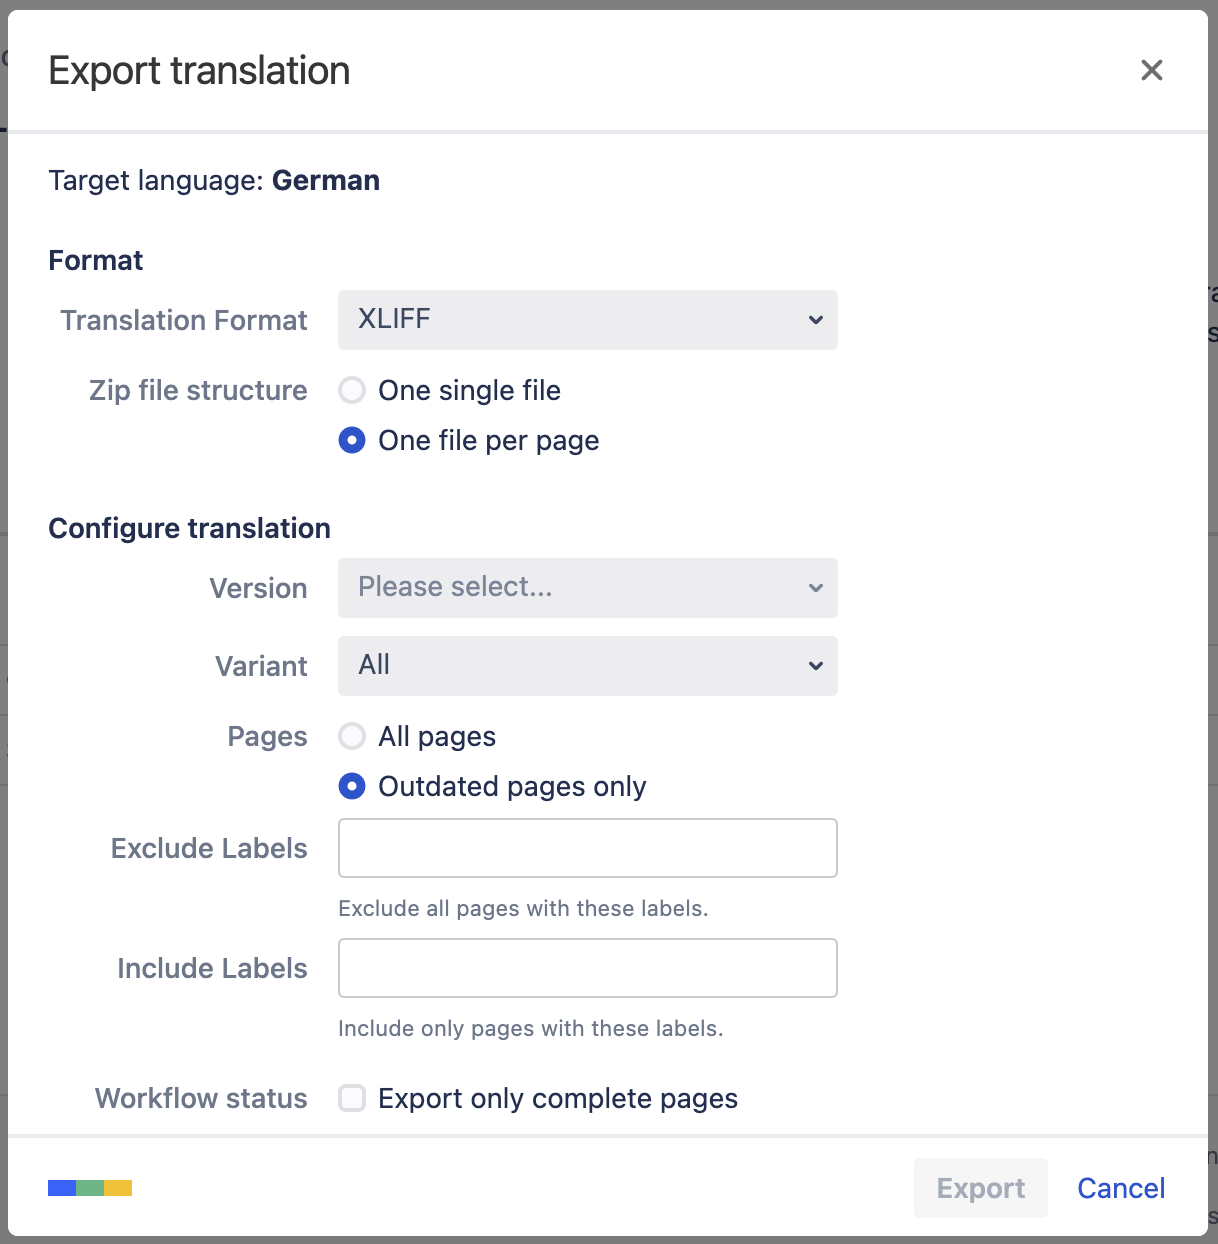 Export translation dialog showing the different export configuration options